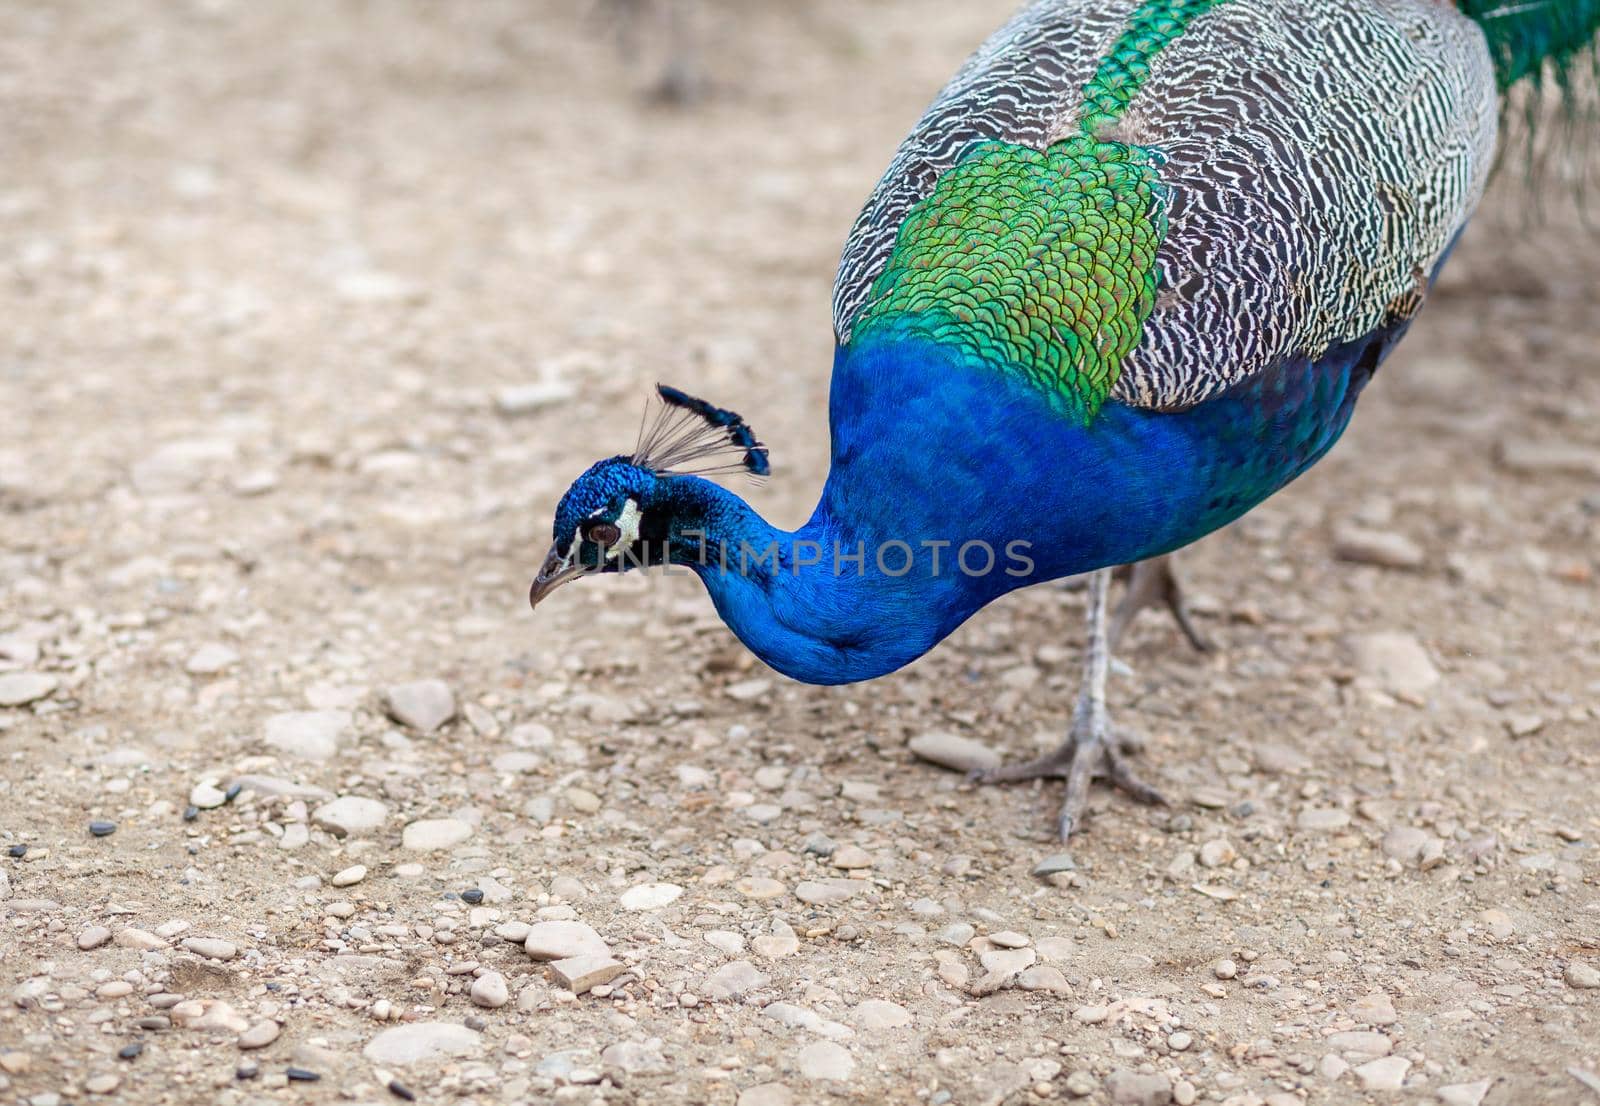 A beautiful peacock with bright feathers walks next to tourists and asks for food.